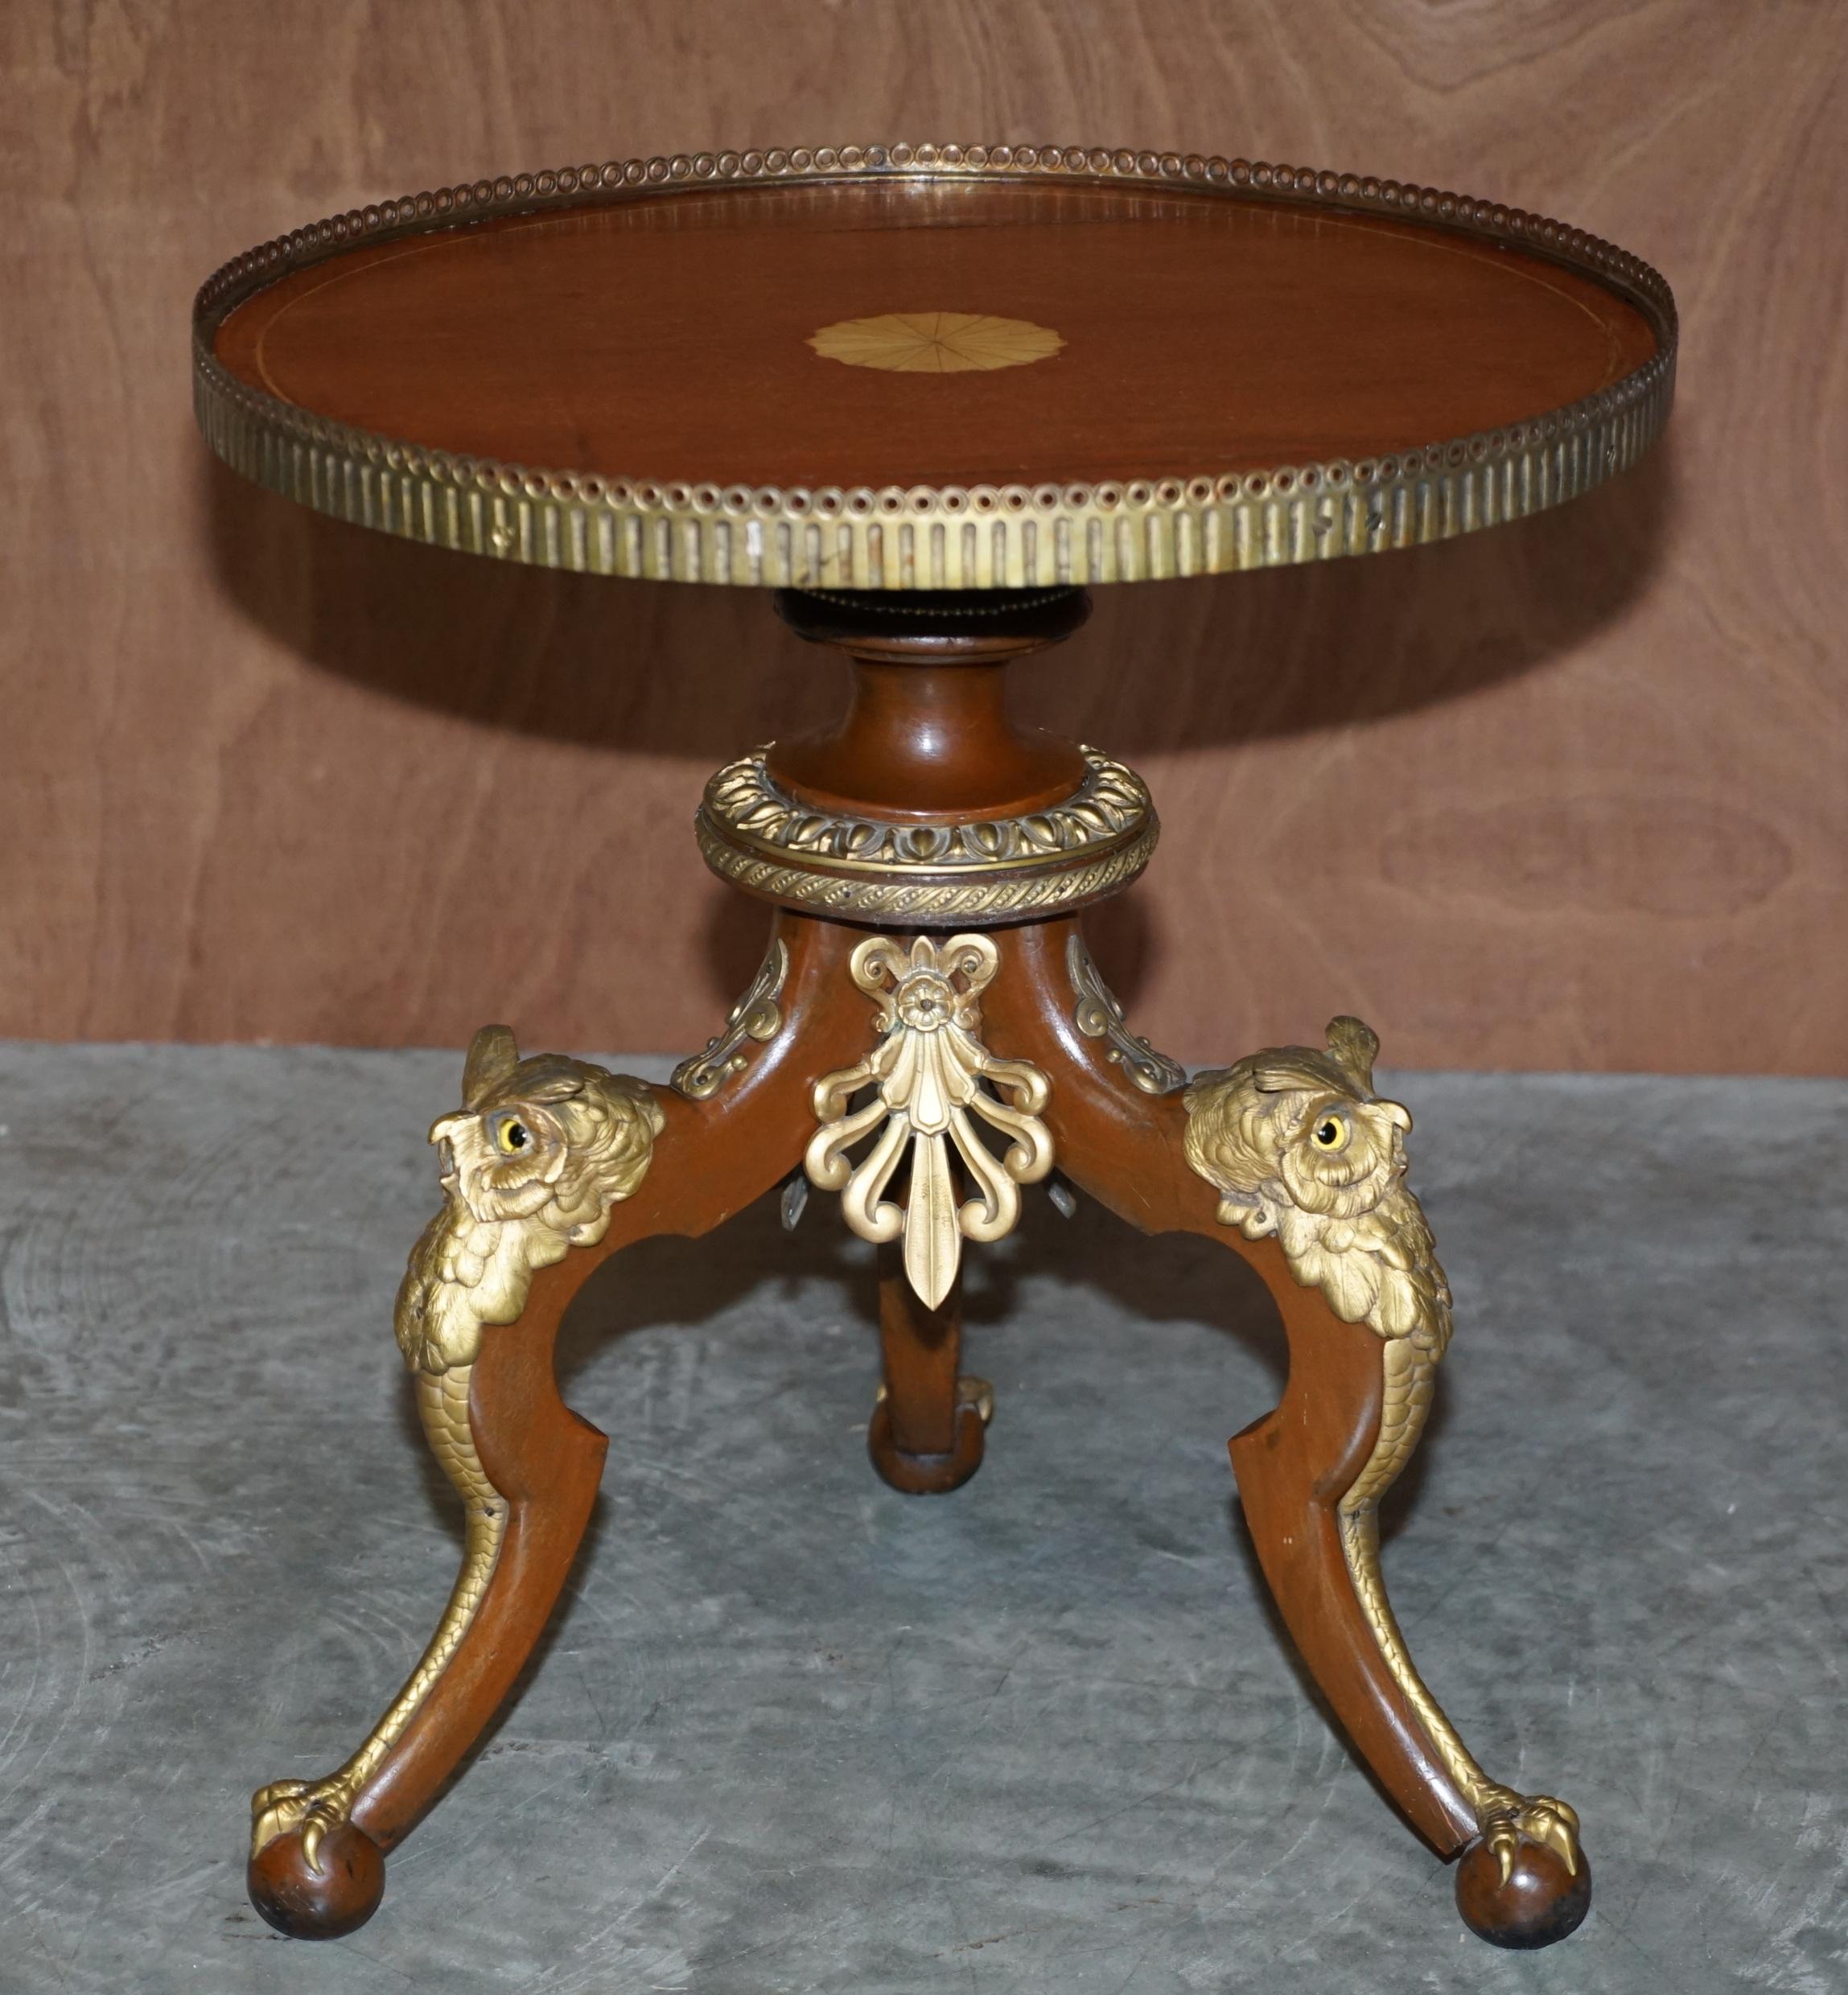 We are delighted to offer for sale this lovely very charming mahogany side table with gilt gallery rail, Sheraton revival inlaid top and gold gilt bronze Owls to the legs

This has to be the most decorative and charming table I have seen all year!